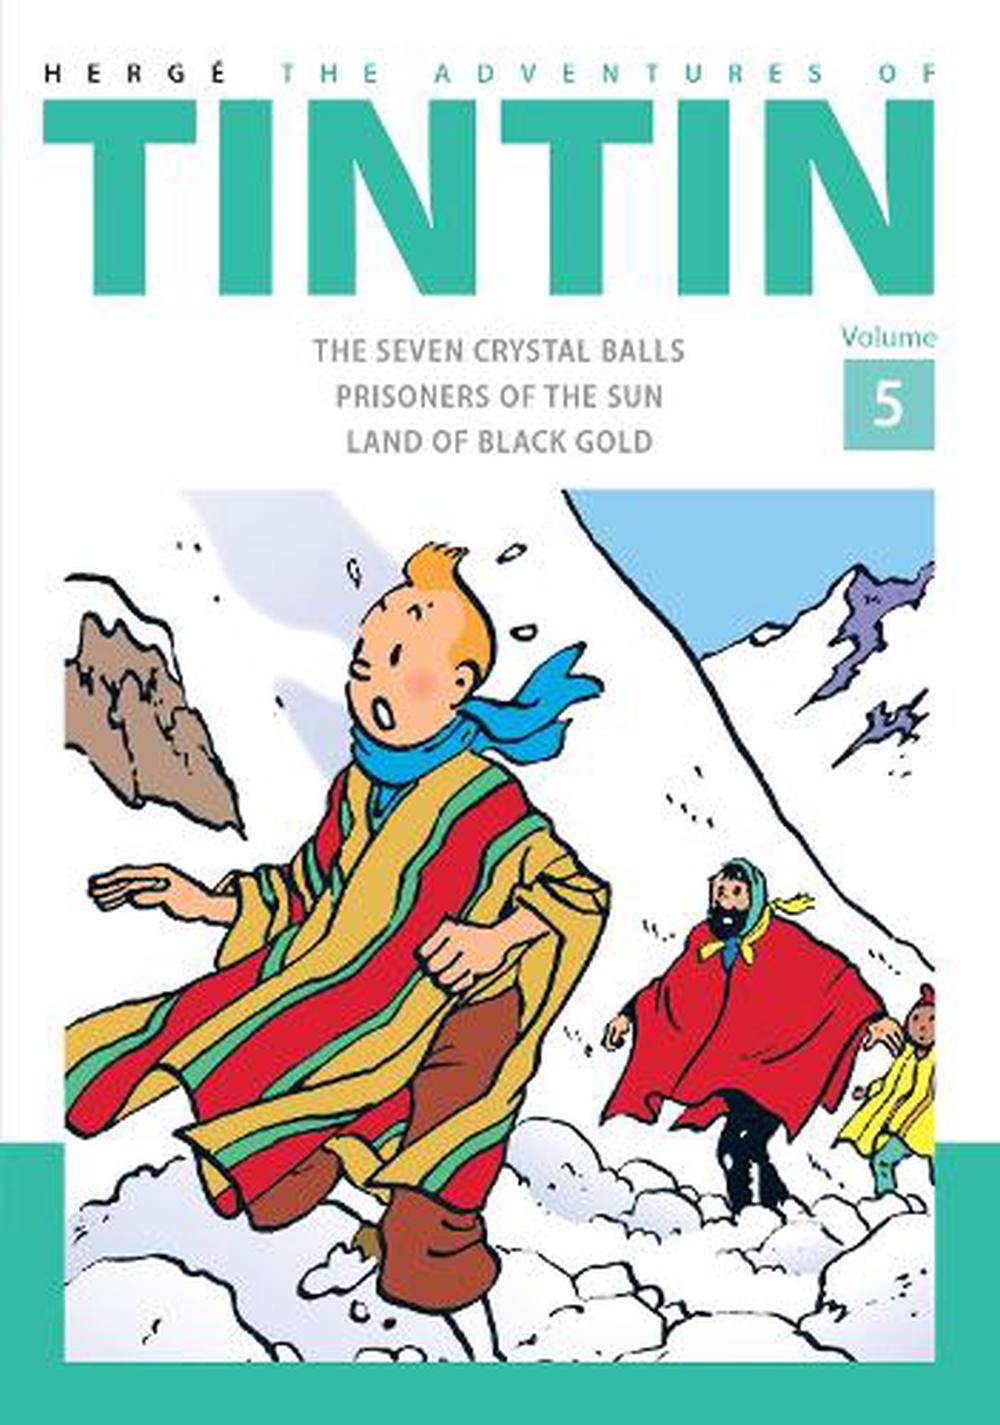 Adventures Of Tintin Volume 5 By Herge English Hardcover Book Free Shipping 9781405282796 Ebay 